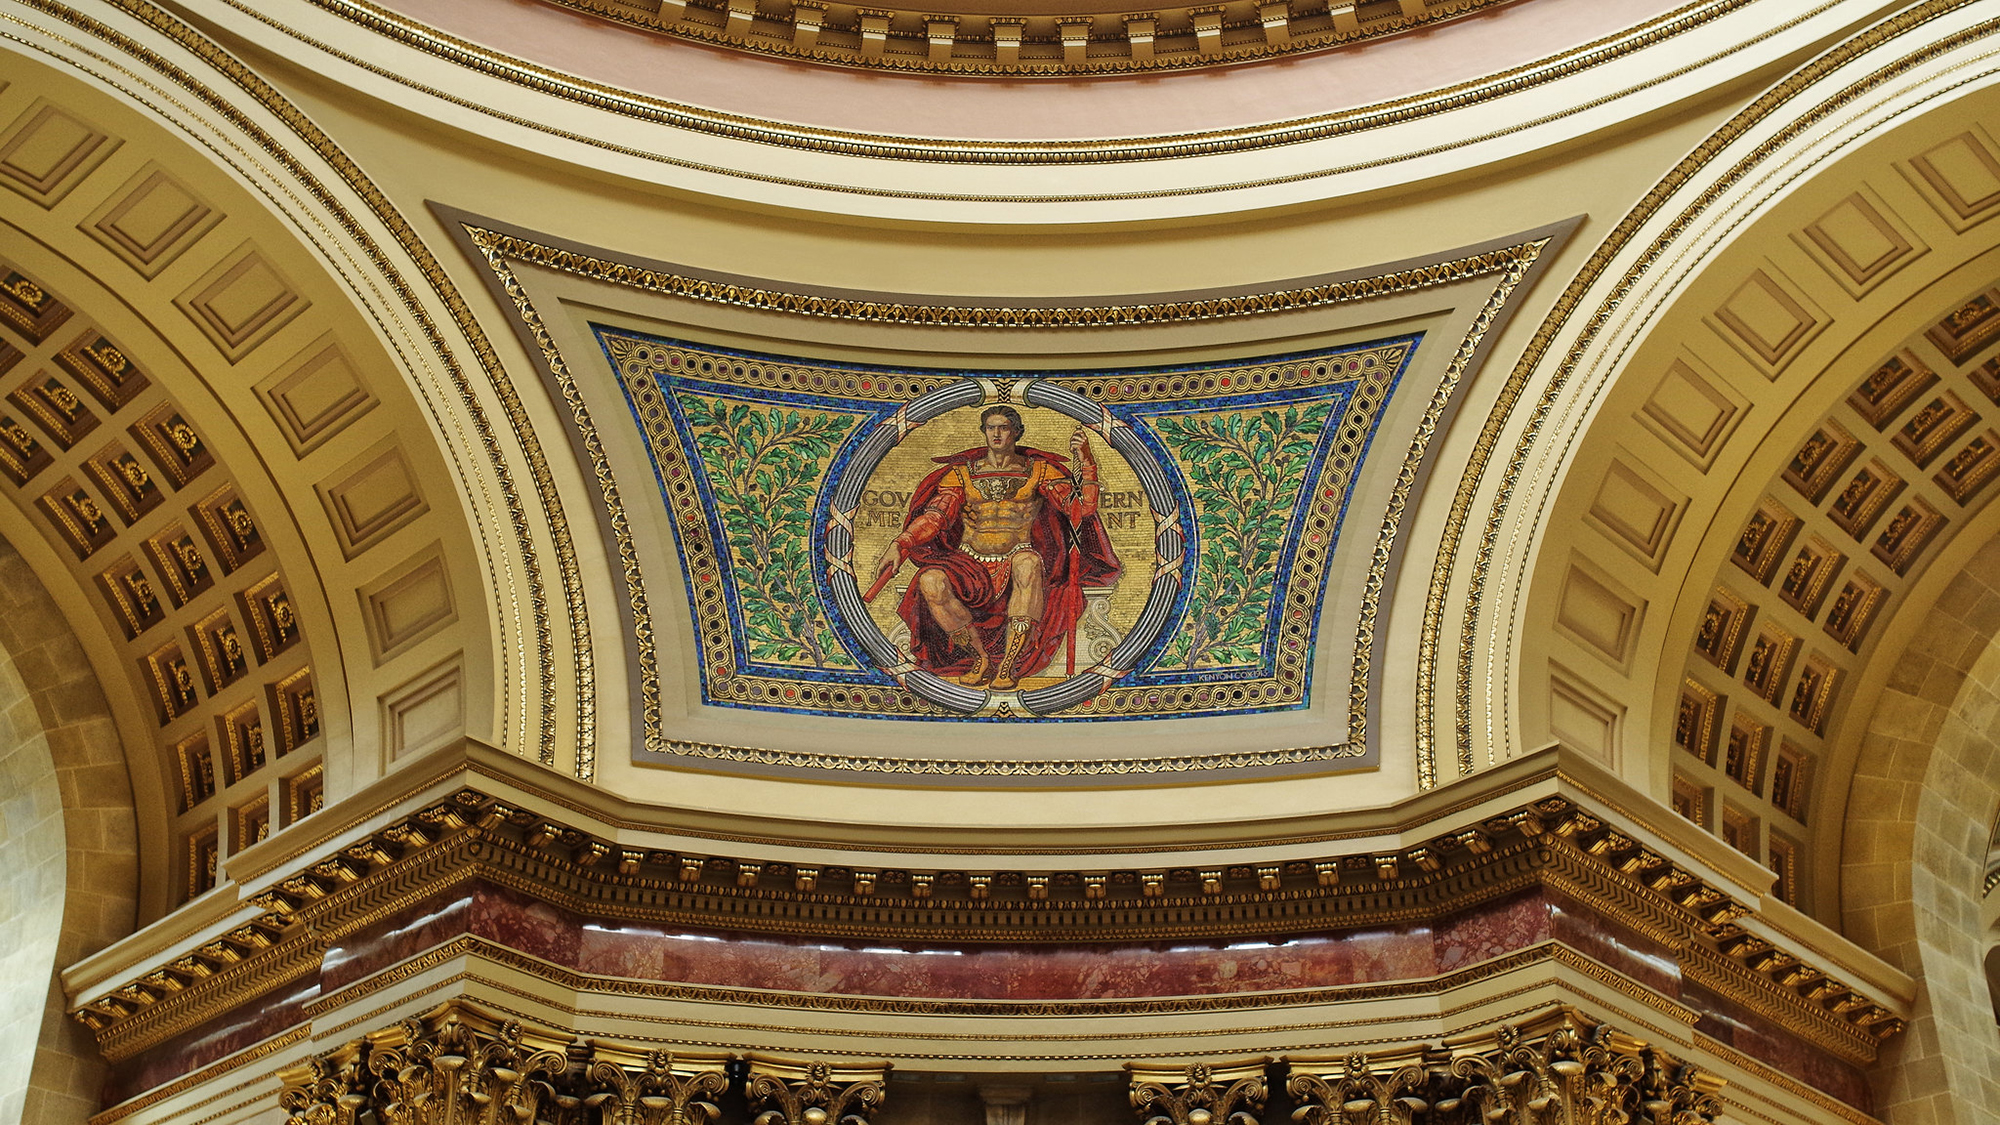 Government mosaic in the Wisconsin State Capitol Rotunda